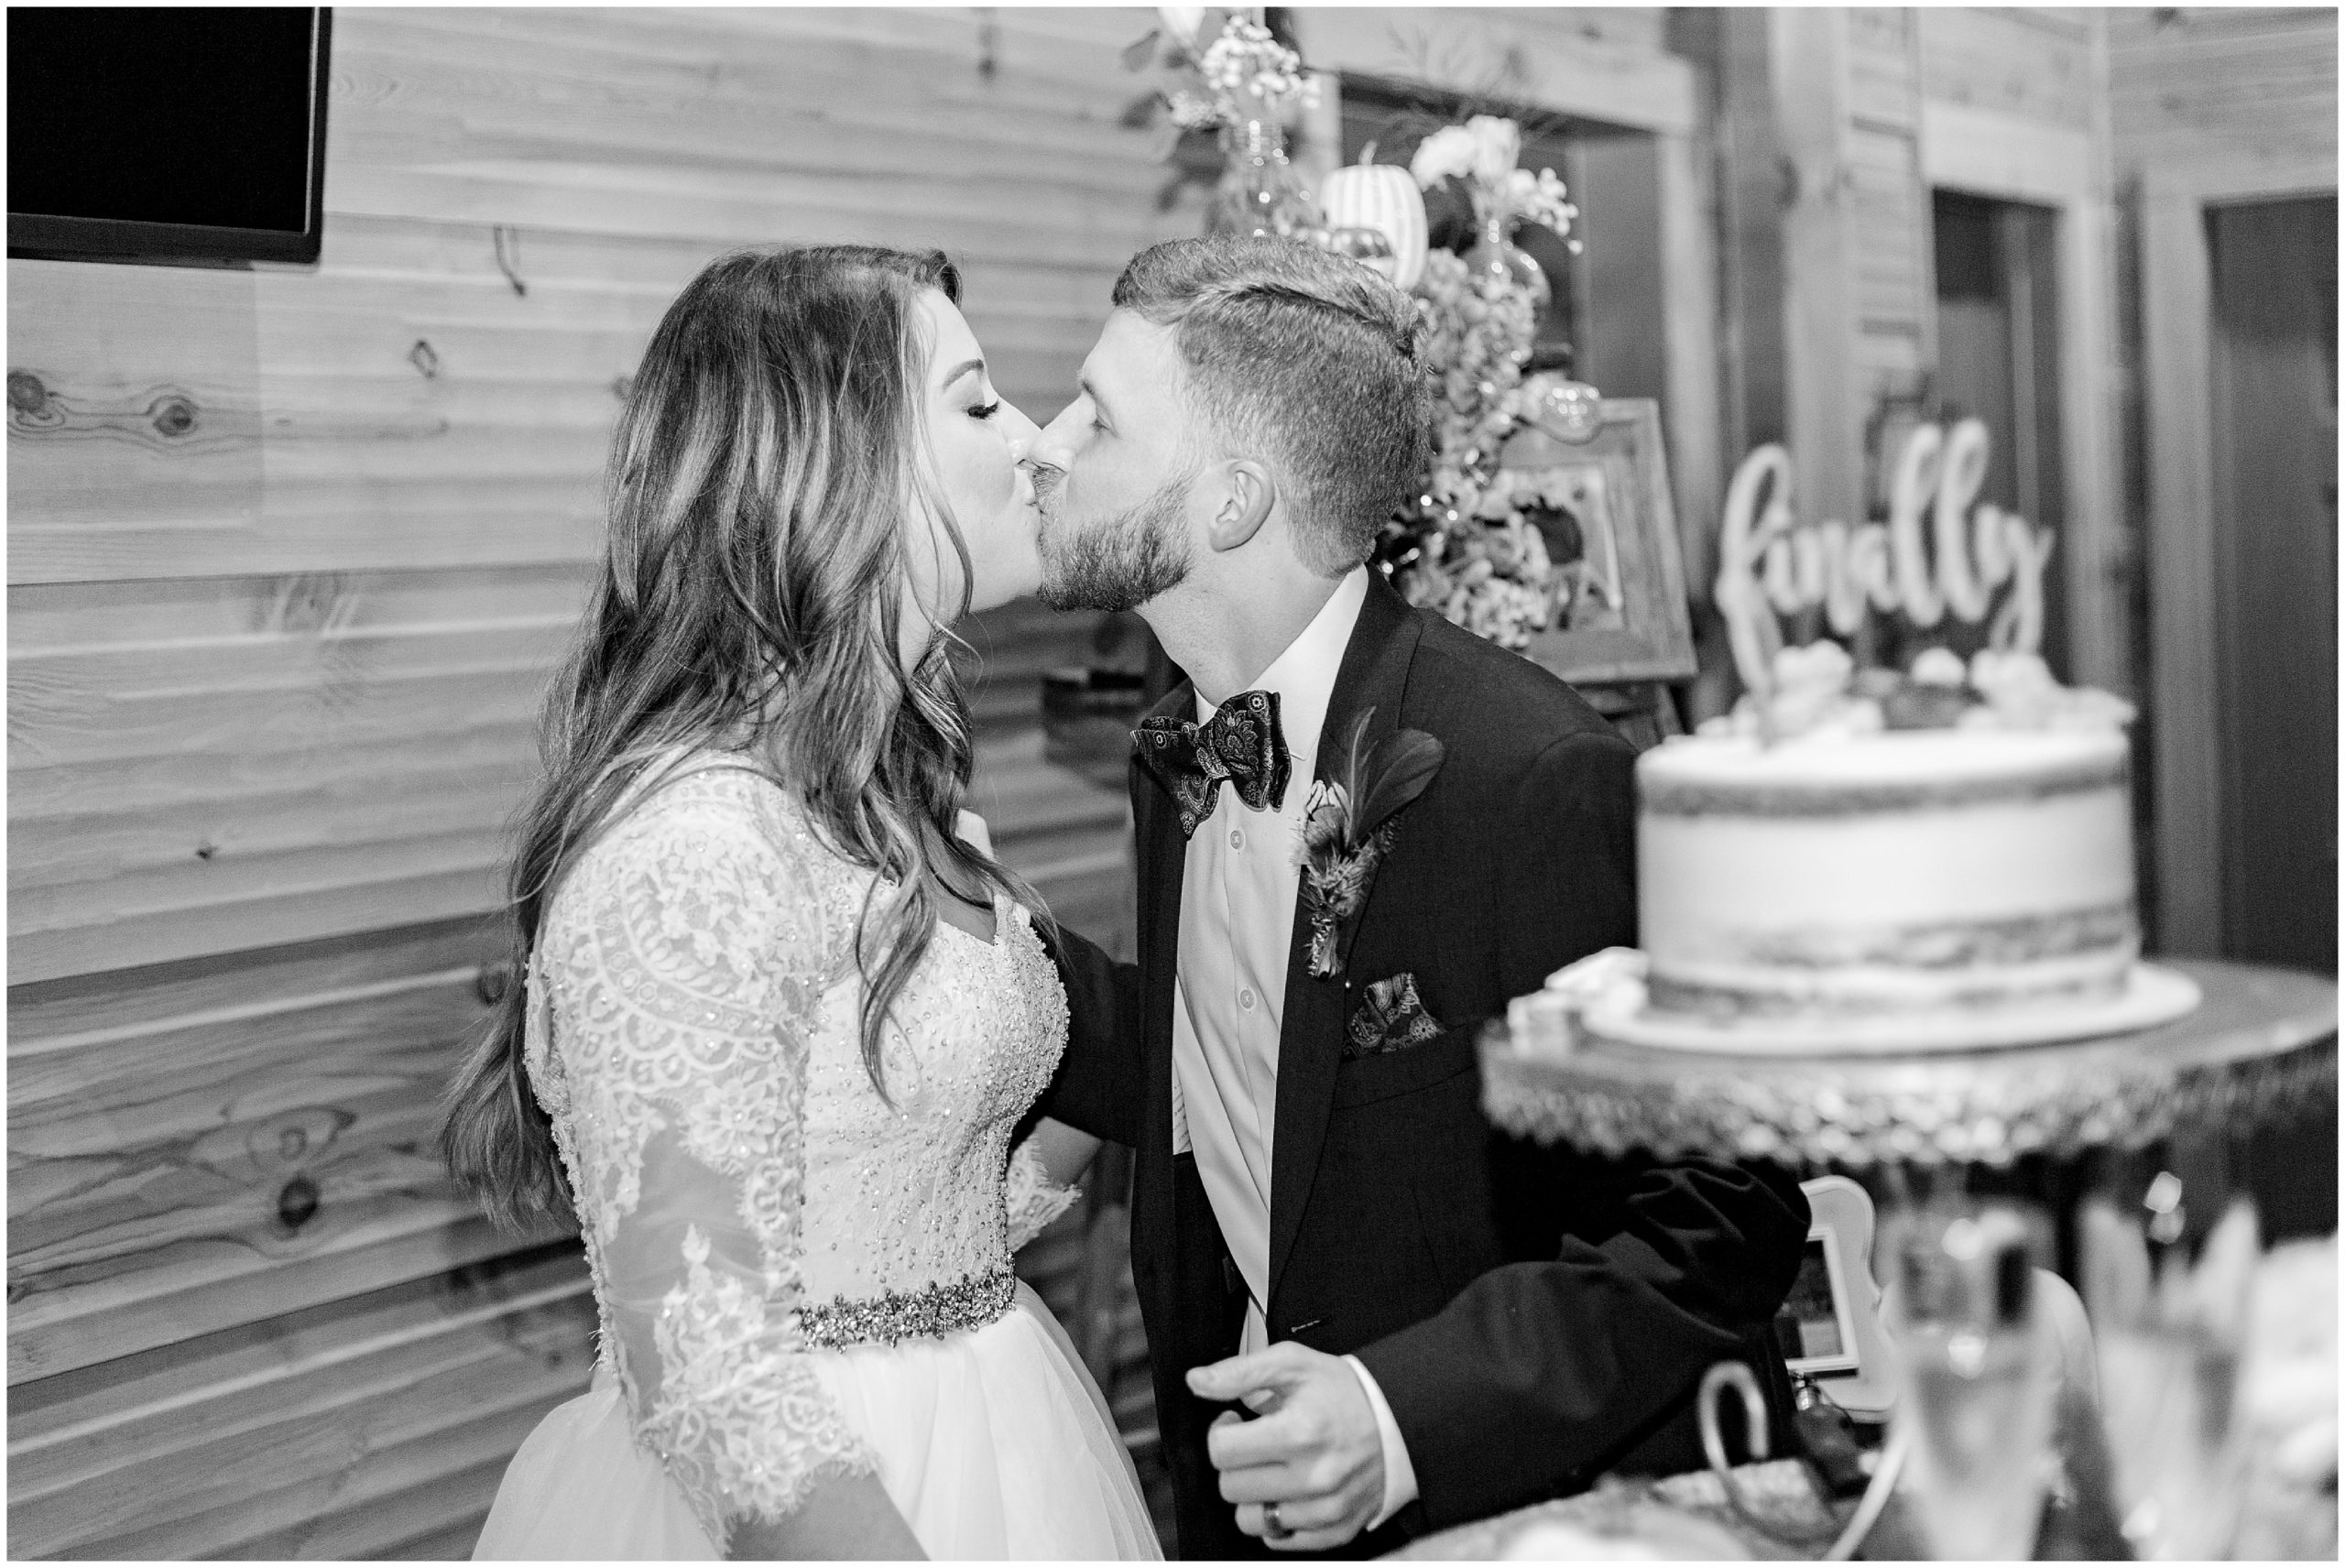 Newlyweds kiss by wedding cake at reception at the Barn at Sitton Hill Farm wedding in SC 